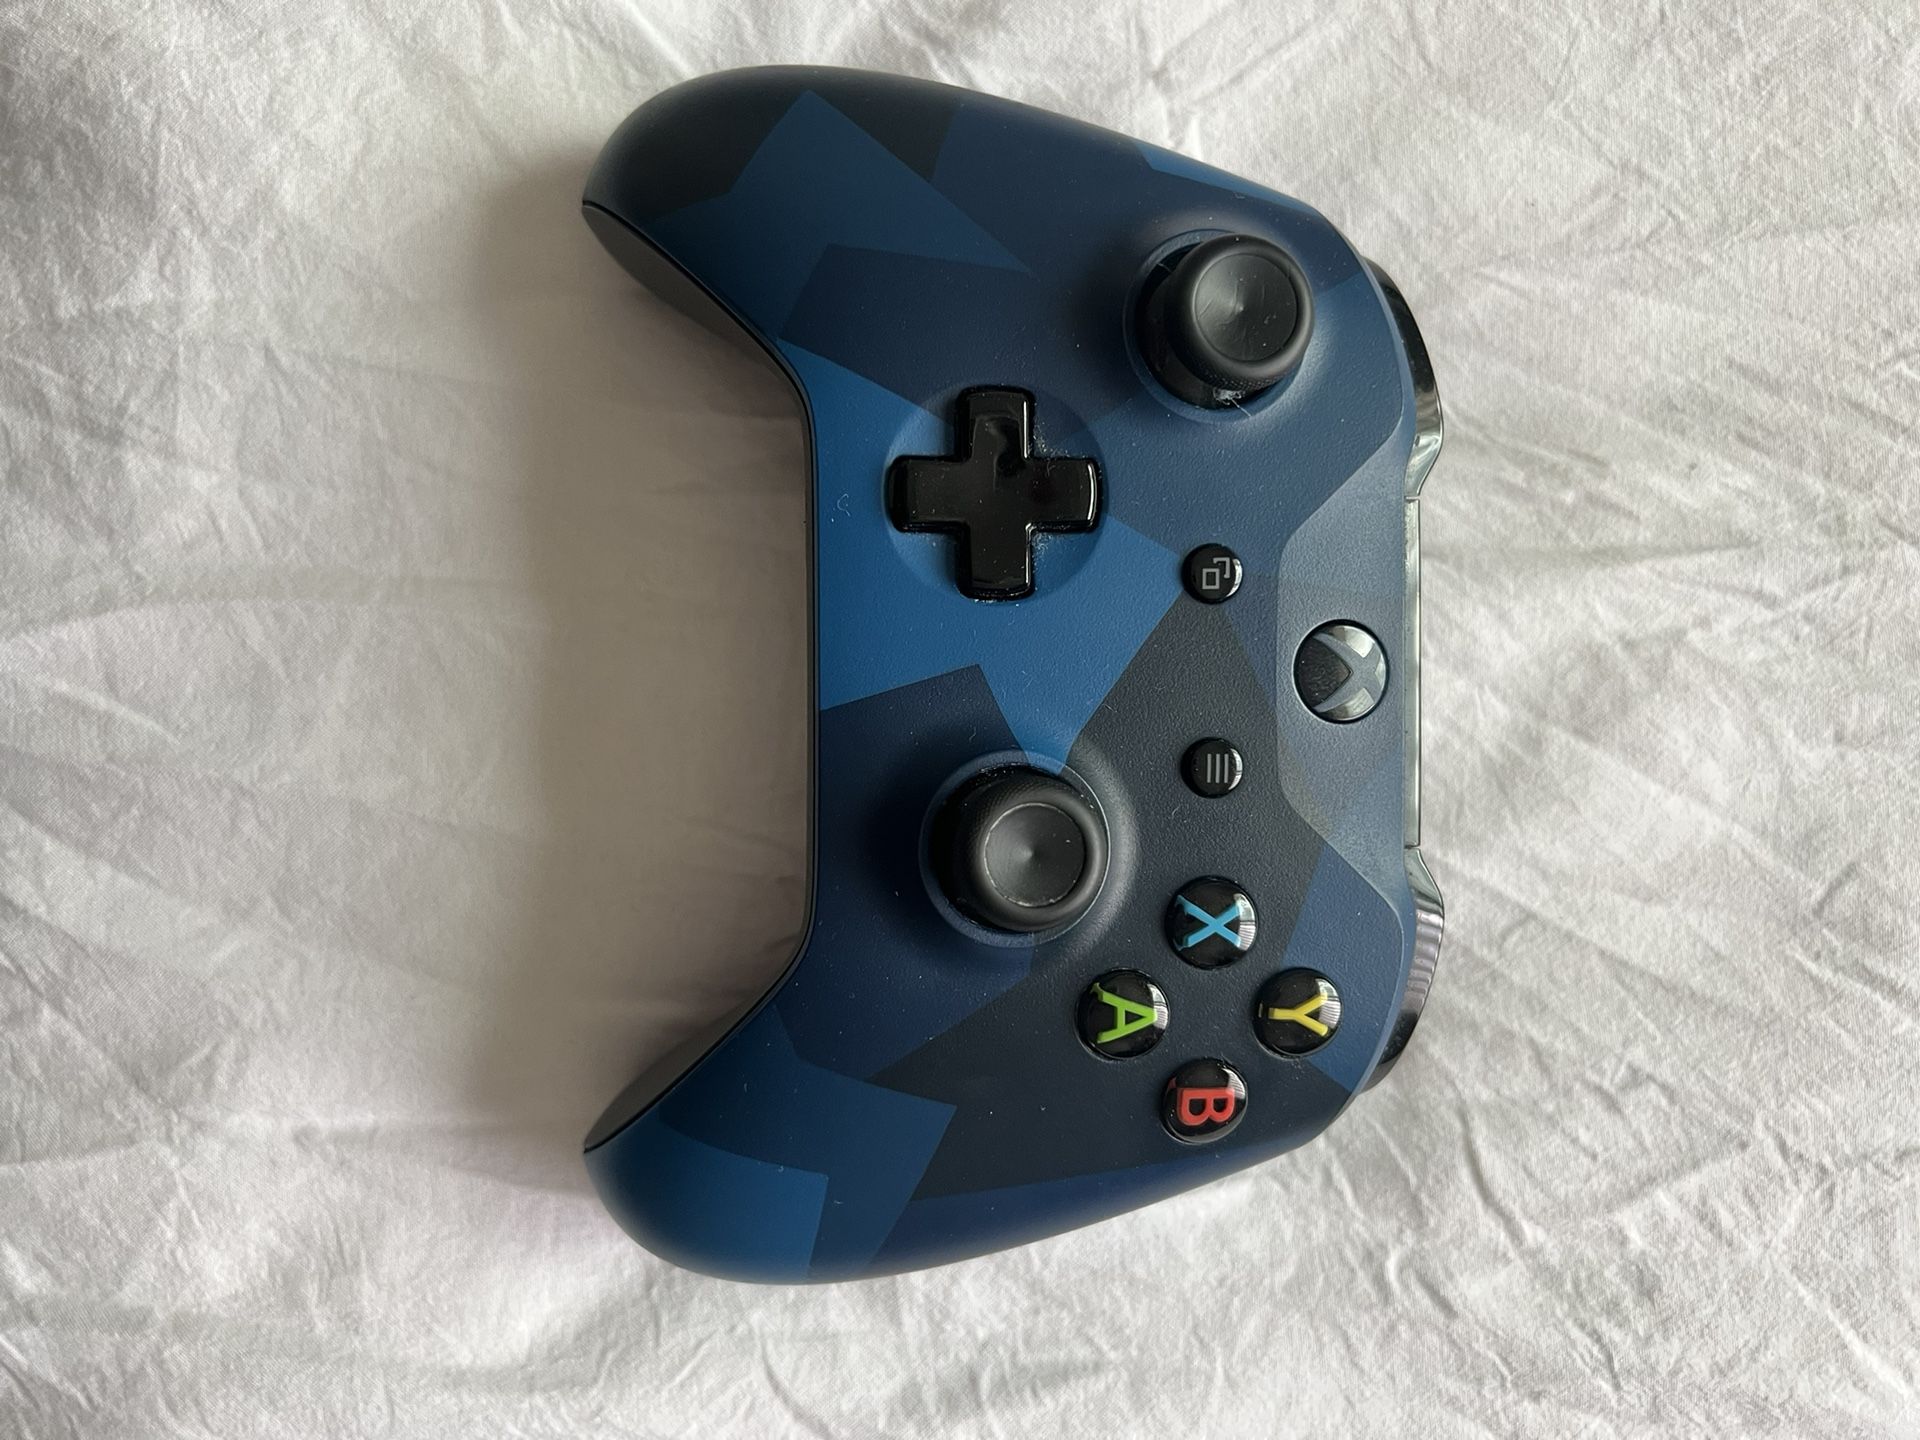 Blue Xbox One Controller 